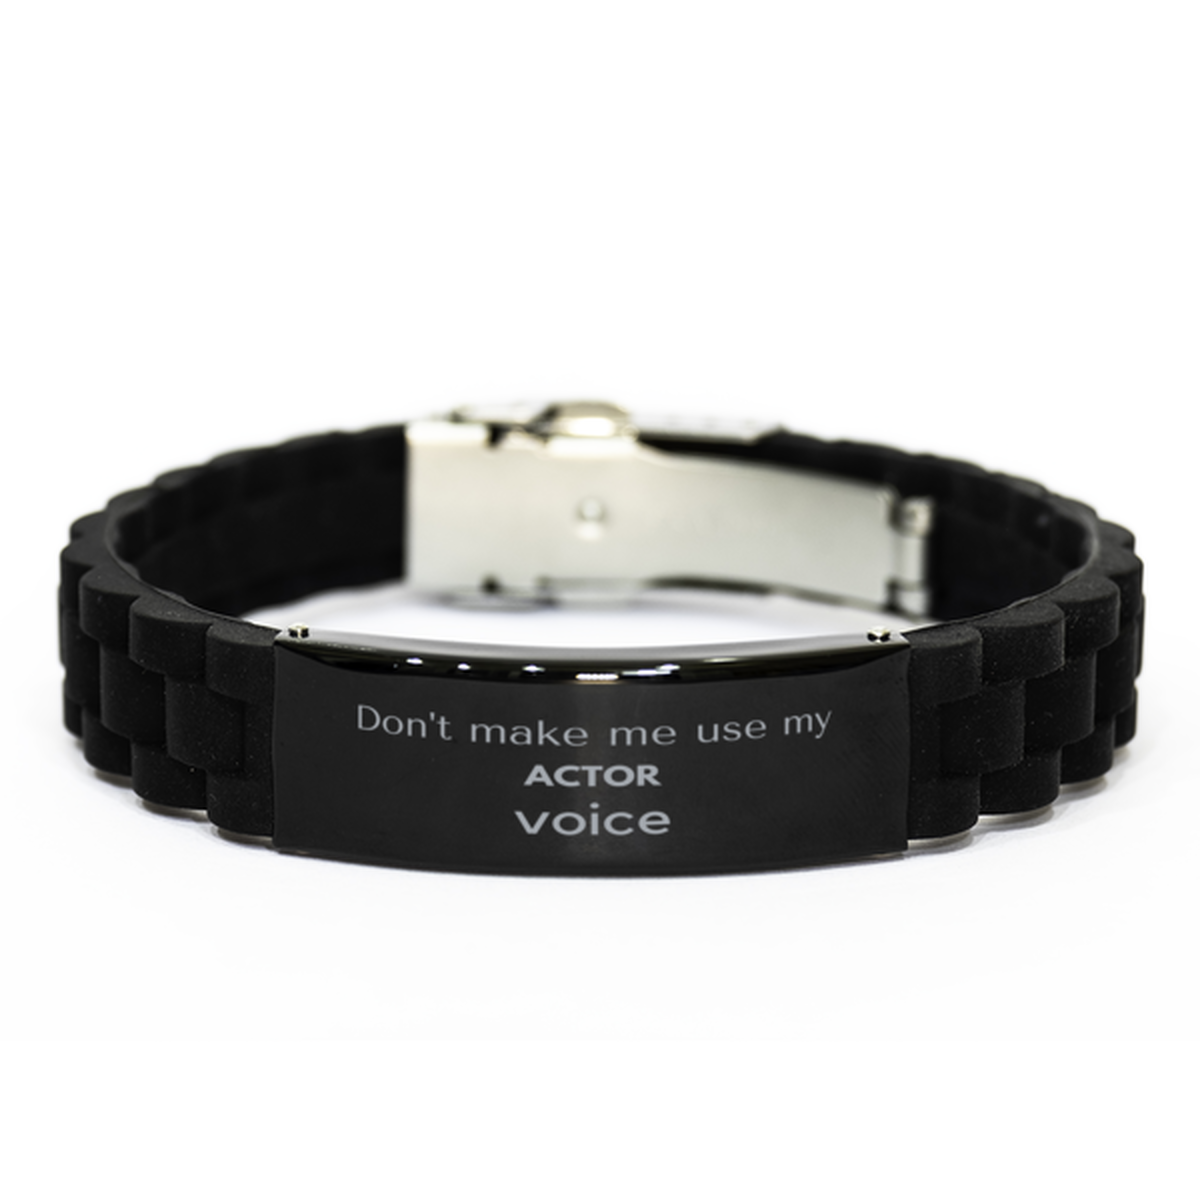 Don't make me use my Actor voice, Sarcasm Actor Gifts, Christmas Actor Black Glidelock Clasp Bracelet Birthday Unique Gifts For Actor Coworkers, Men, Women, Colleague, Friends